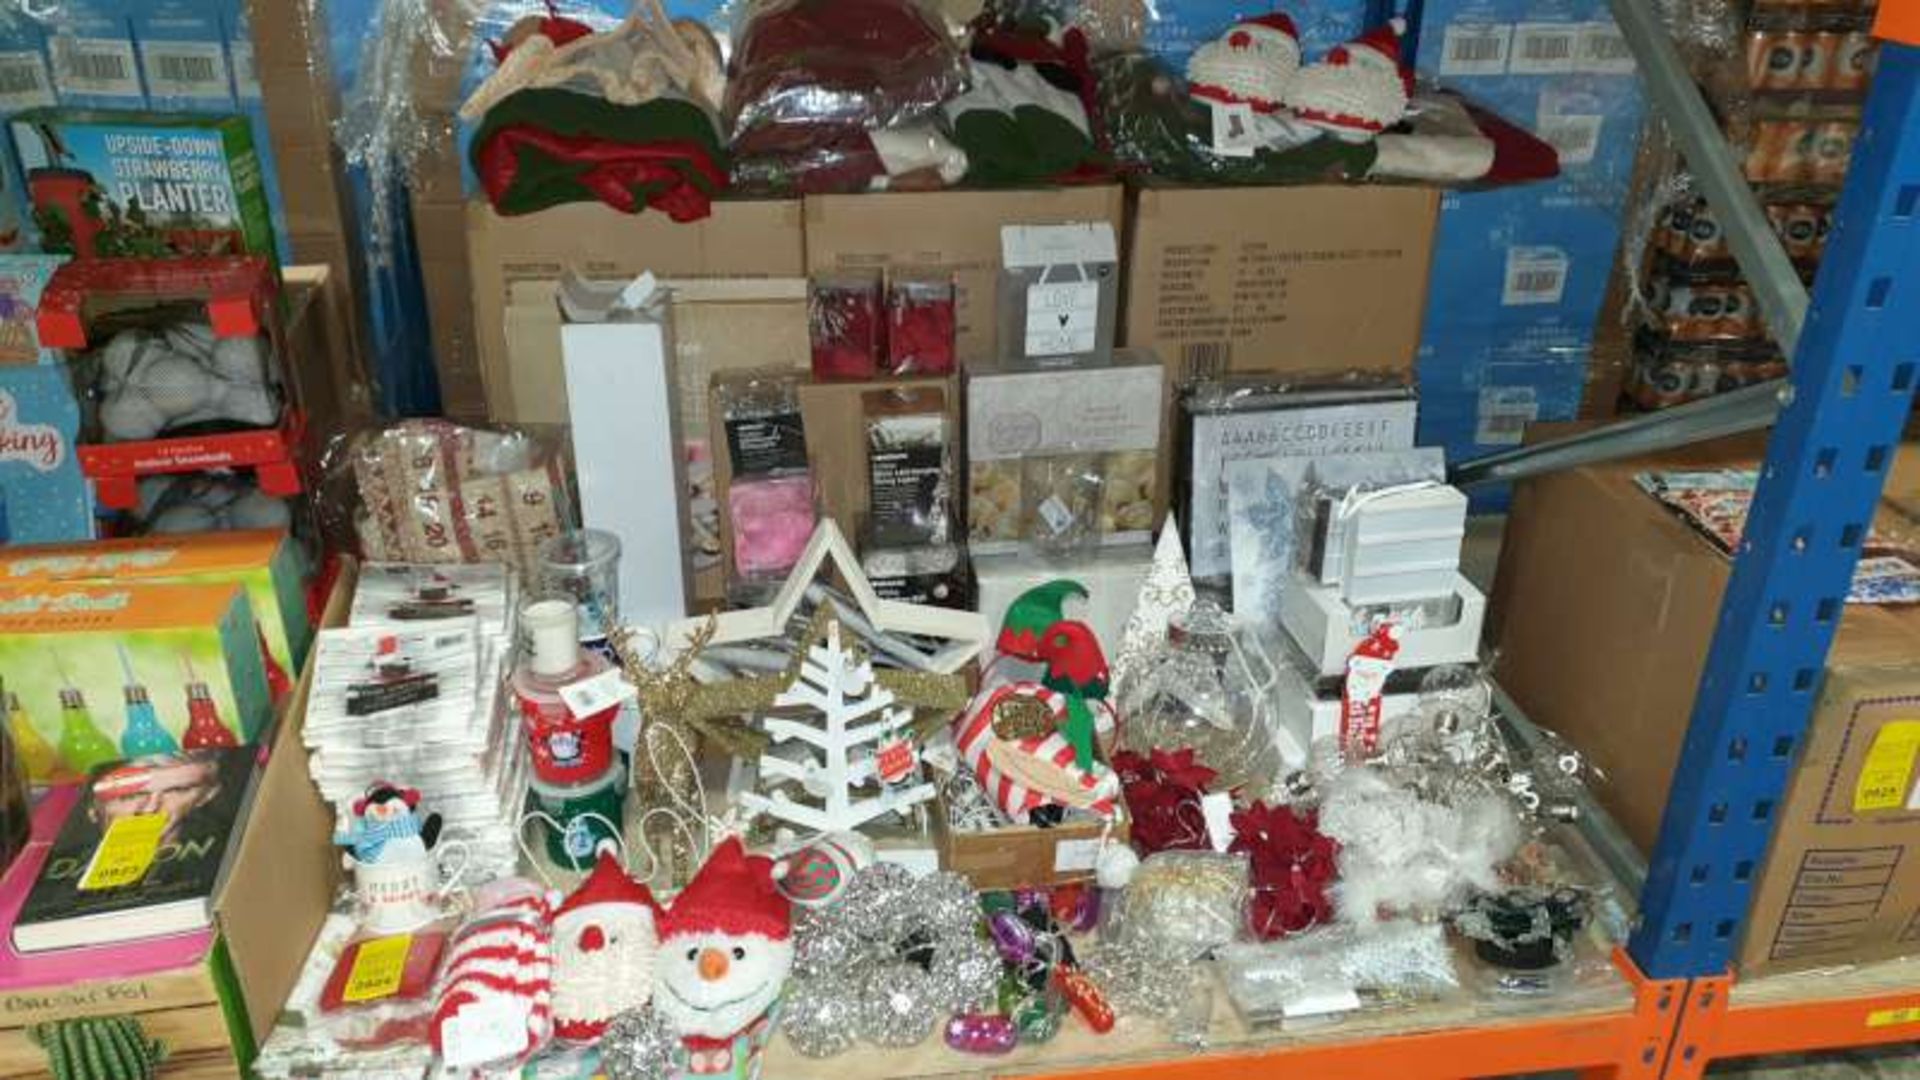 LOT CONTAINING A LARGE QTY OF VARIOUS CHRISTMAS DECORATIONS